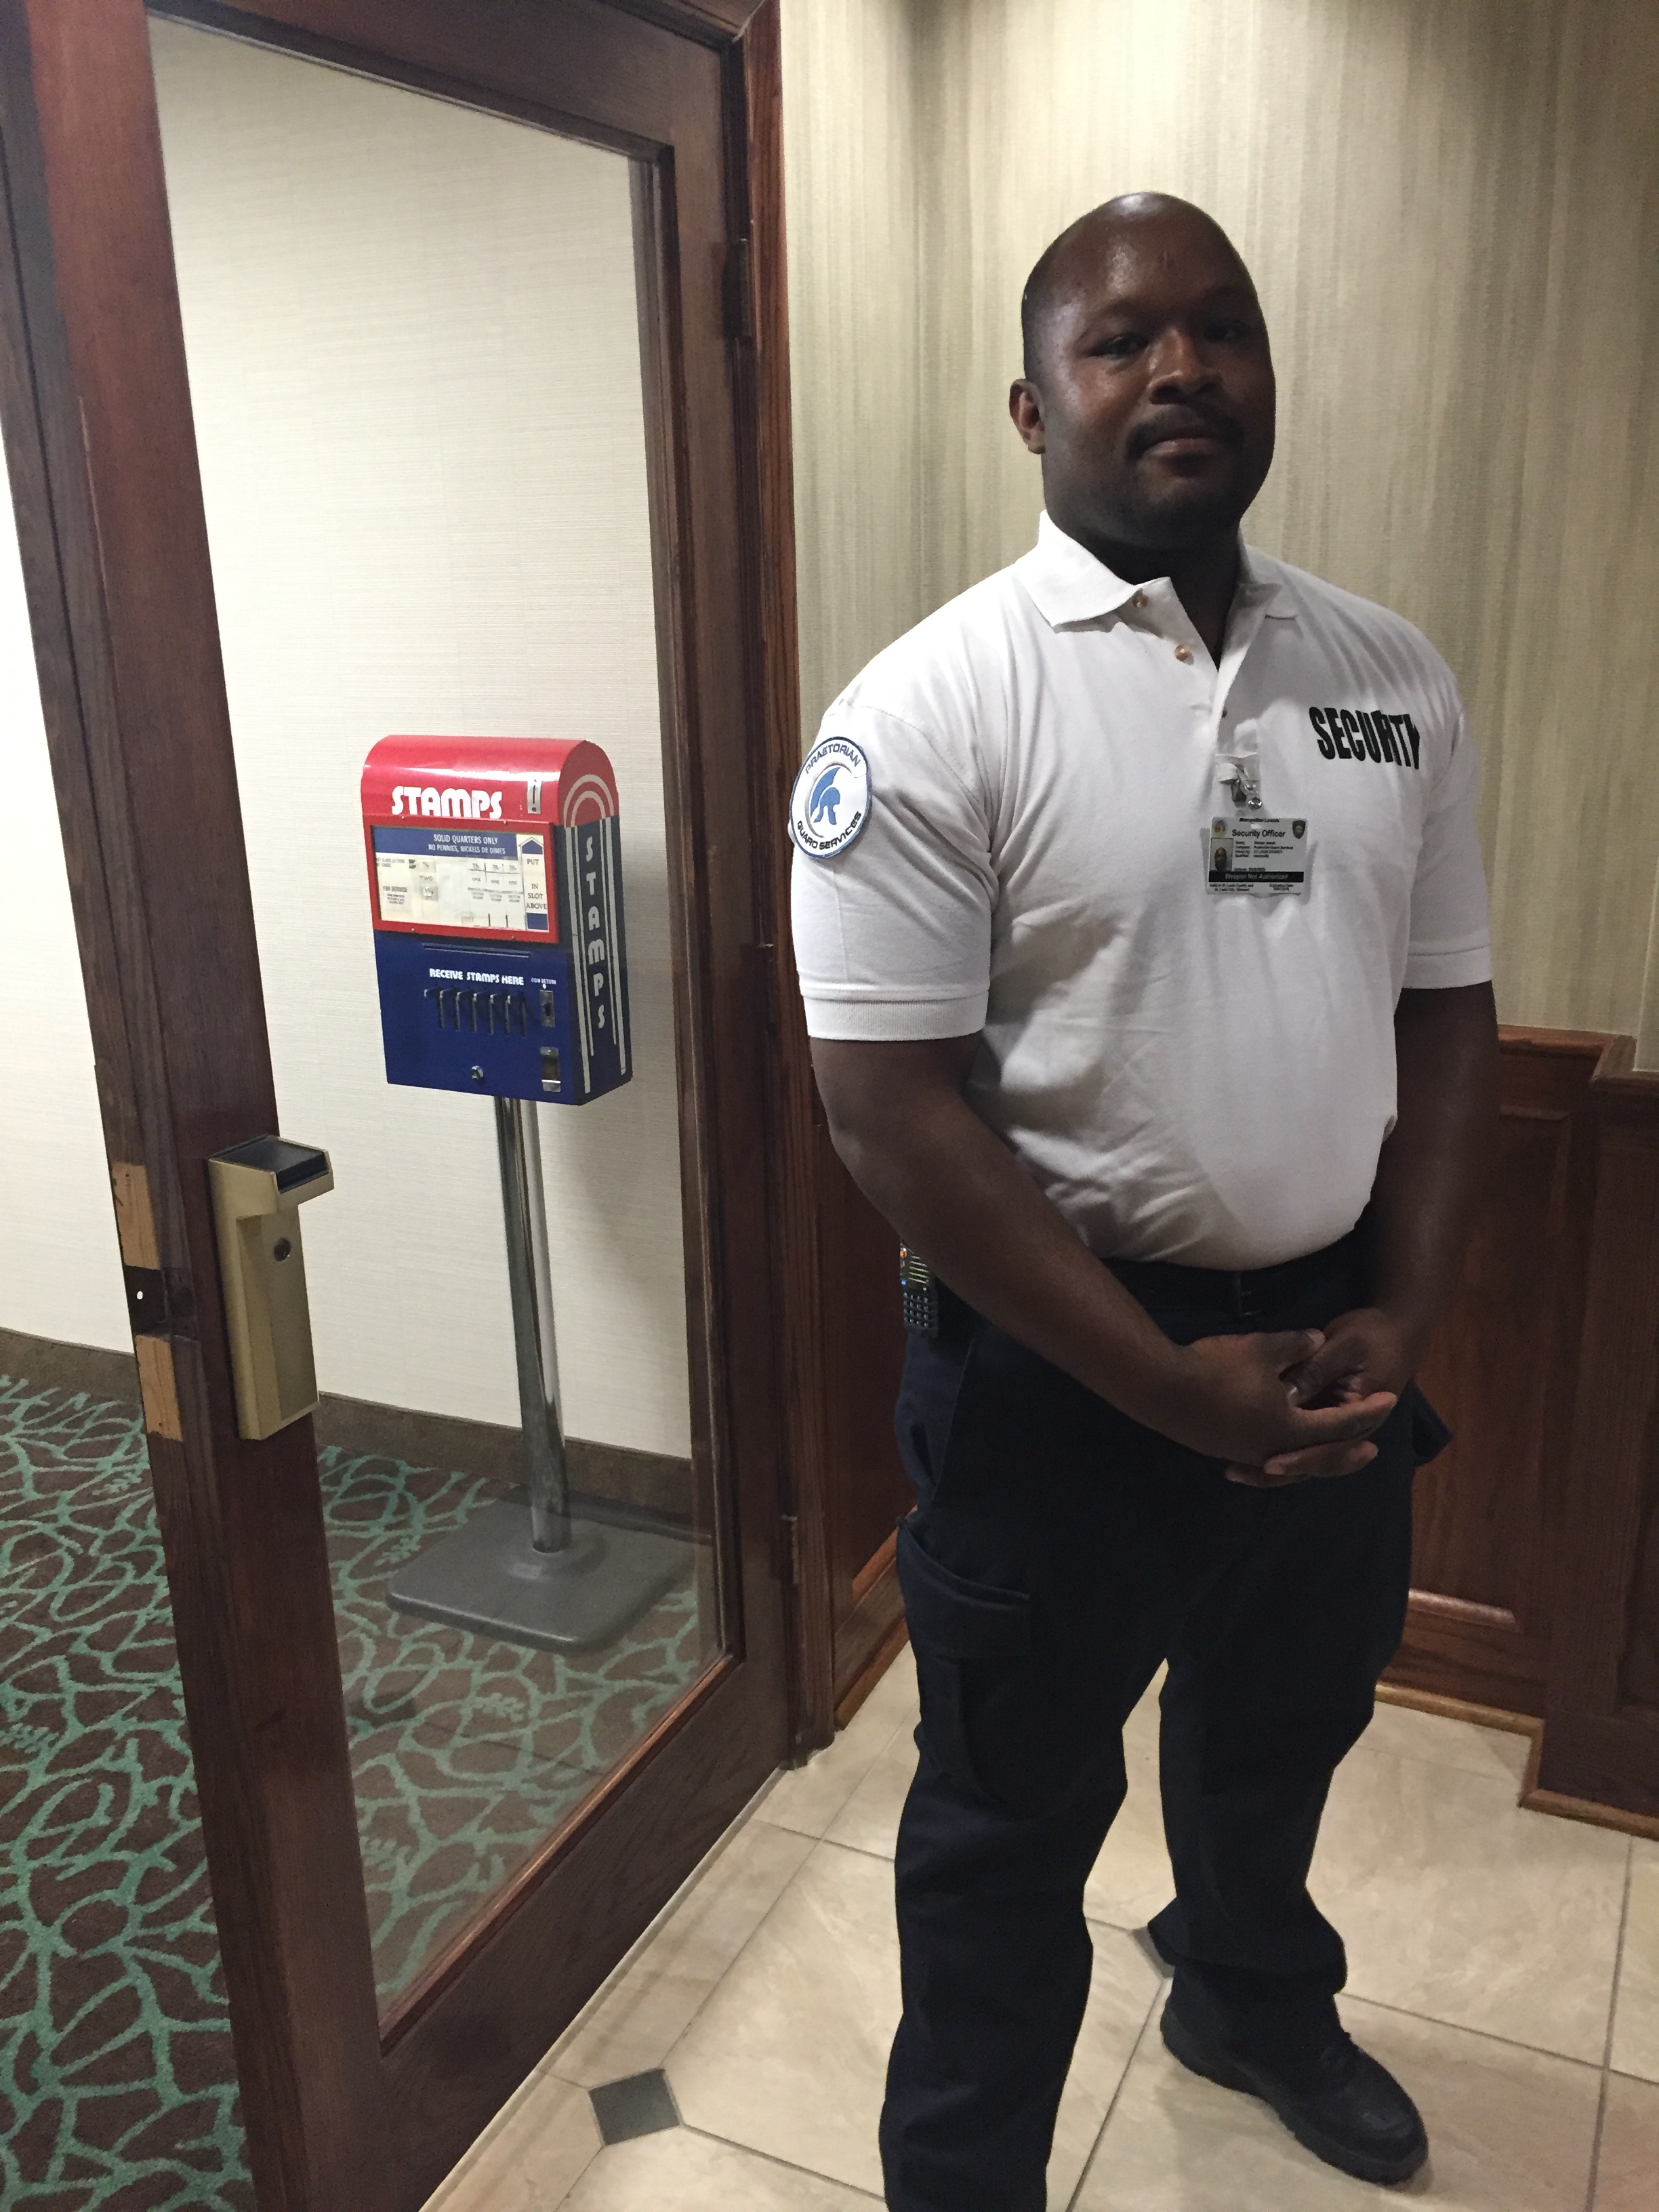 One of our security guards in Kansas City, MO